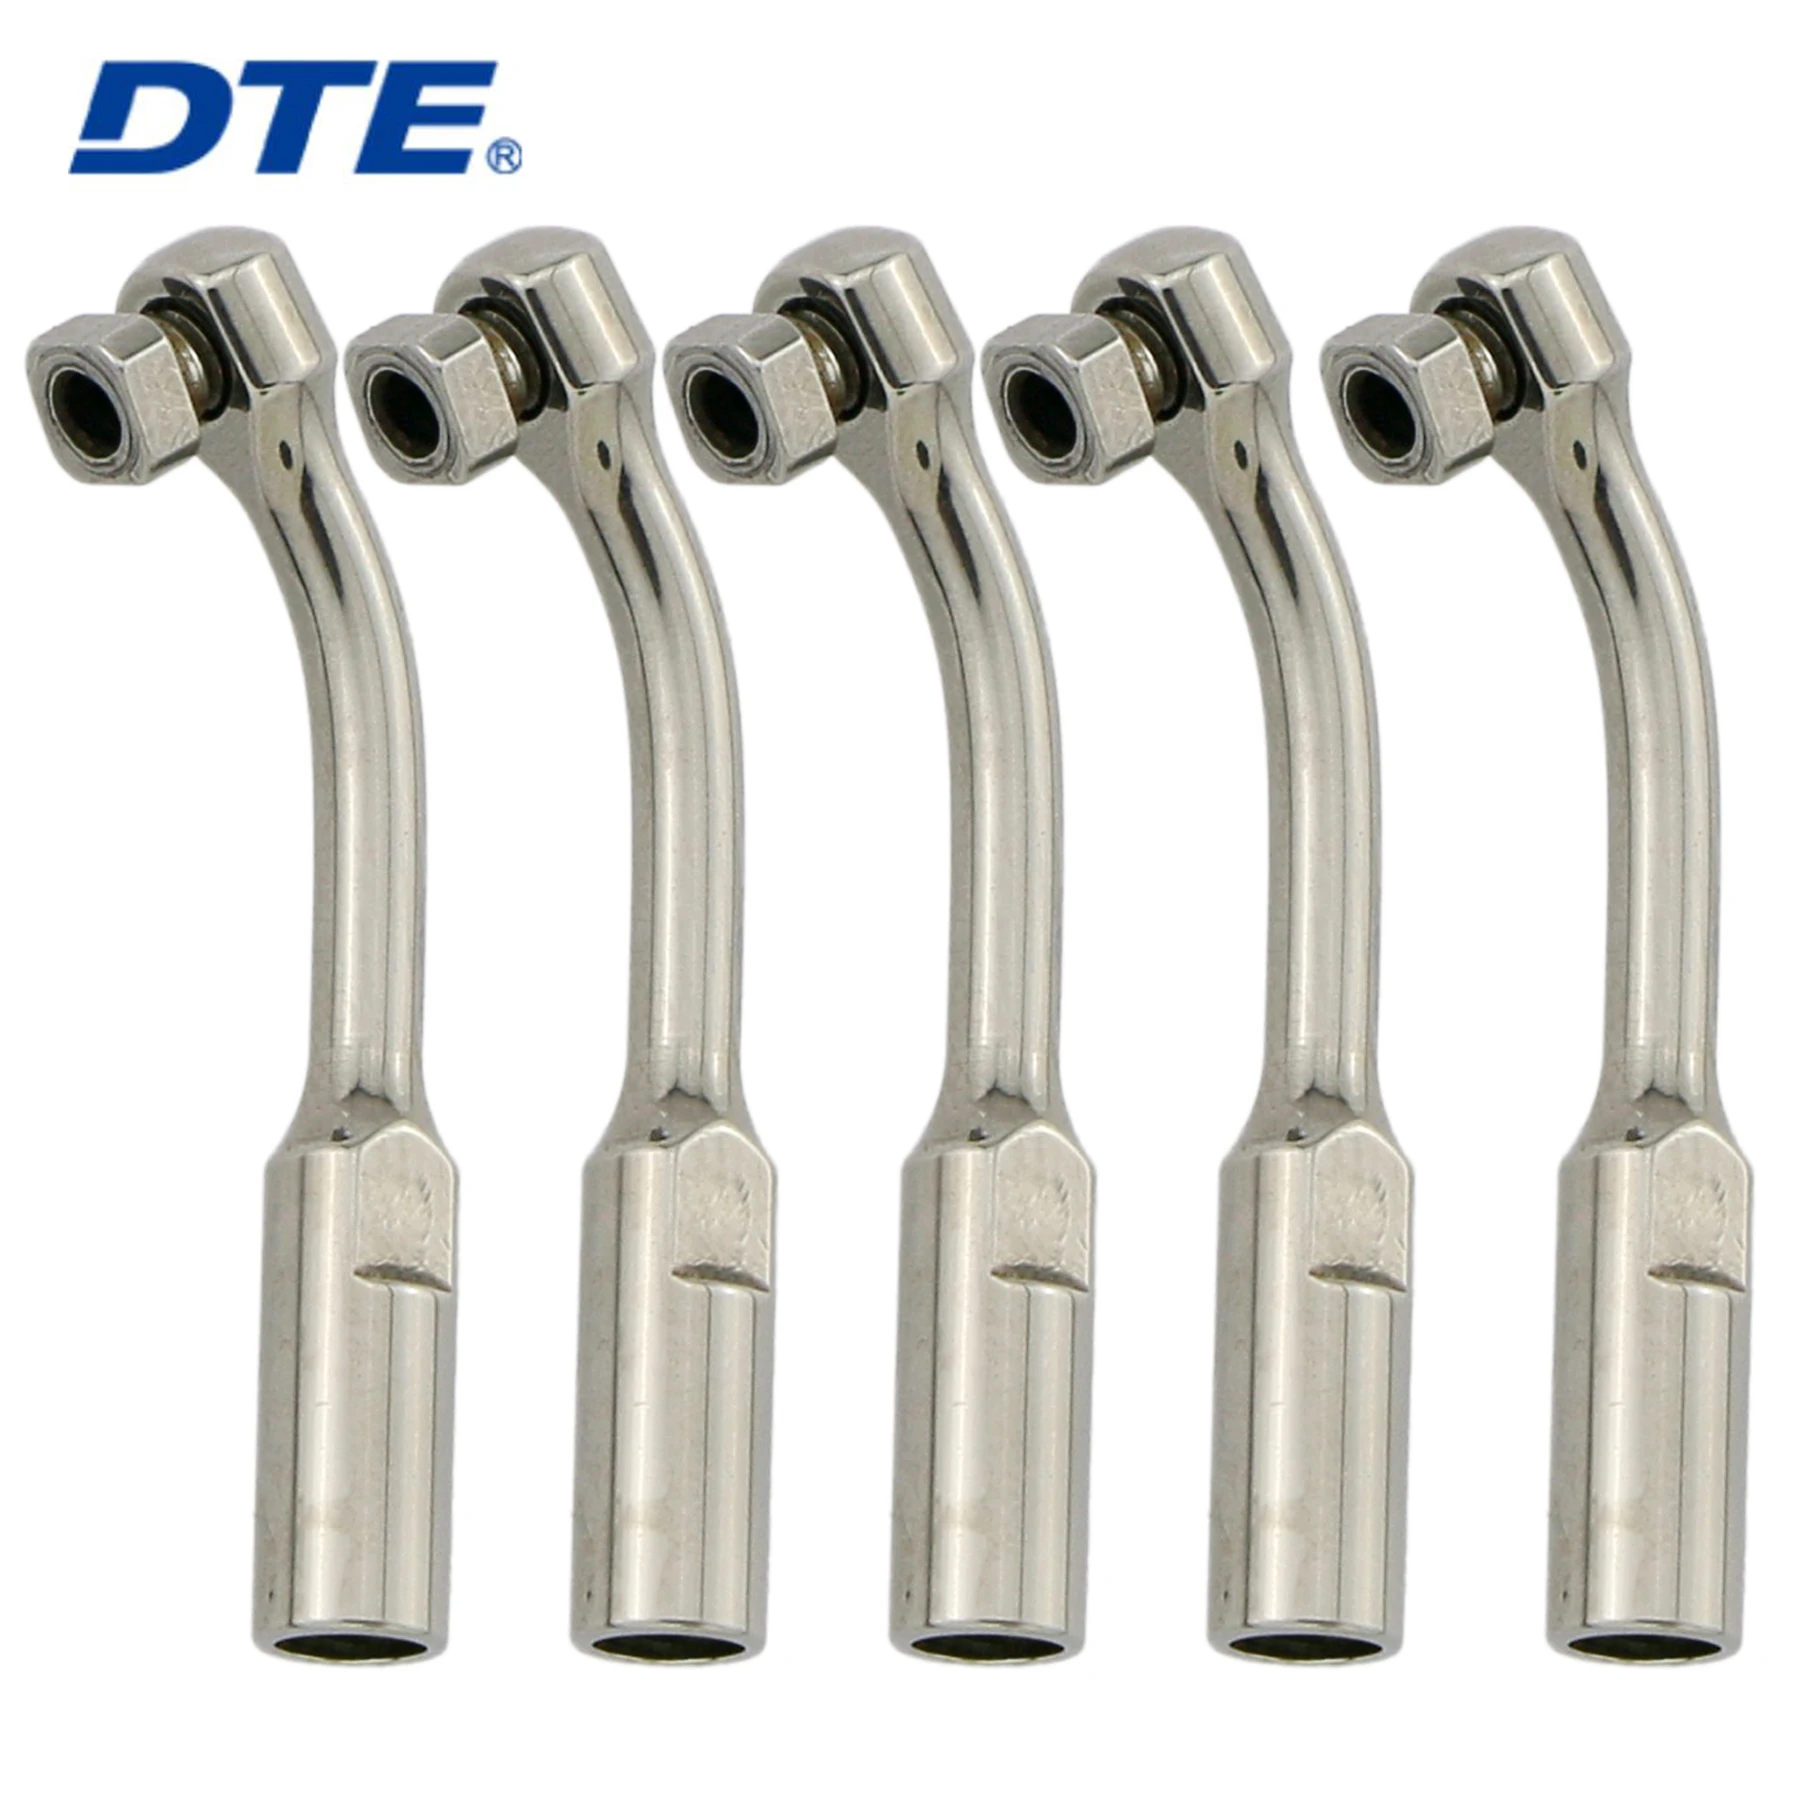 DTE Dental Ultrasonic Scaler Tip ED9 Root Canal Periodontics Endodontics Periodontal Supplies Tools Compatible With NSK SATELEC